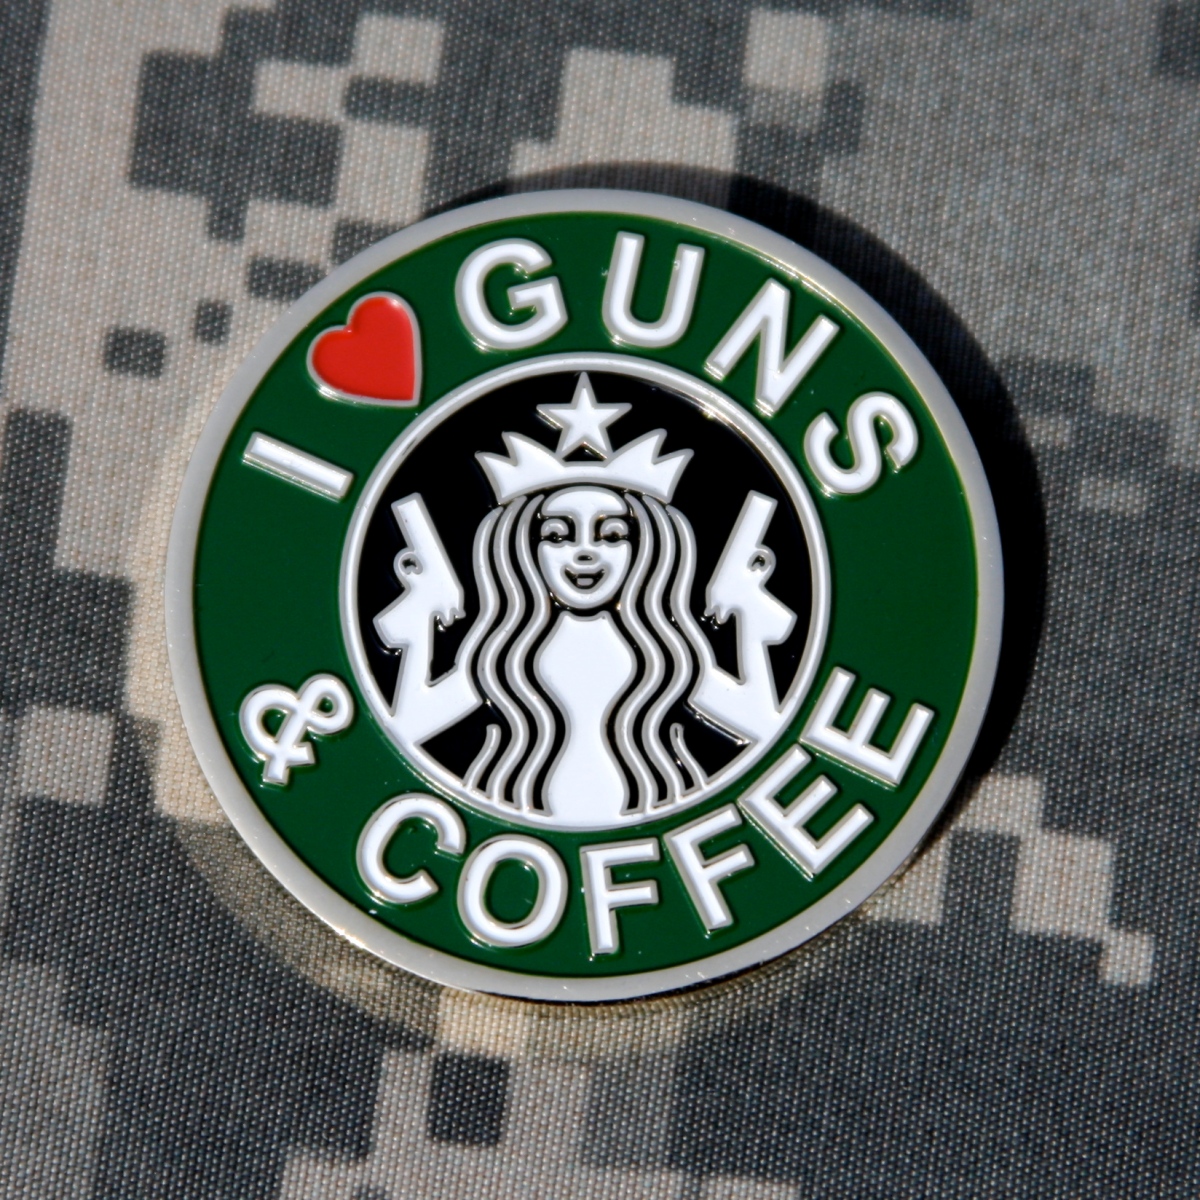 “I Love Guns & Coffee” Morale Challenge Coin | The Commander's Challenge1200 x 1200